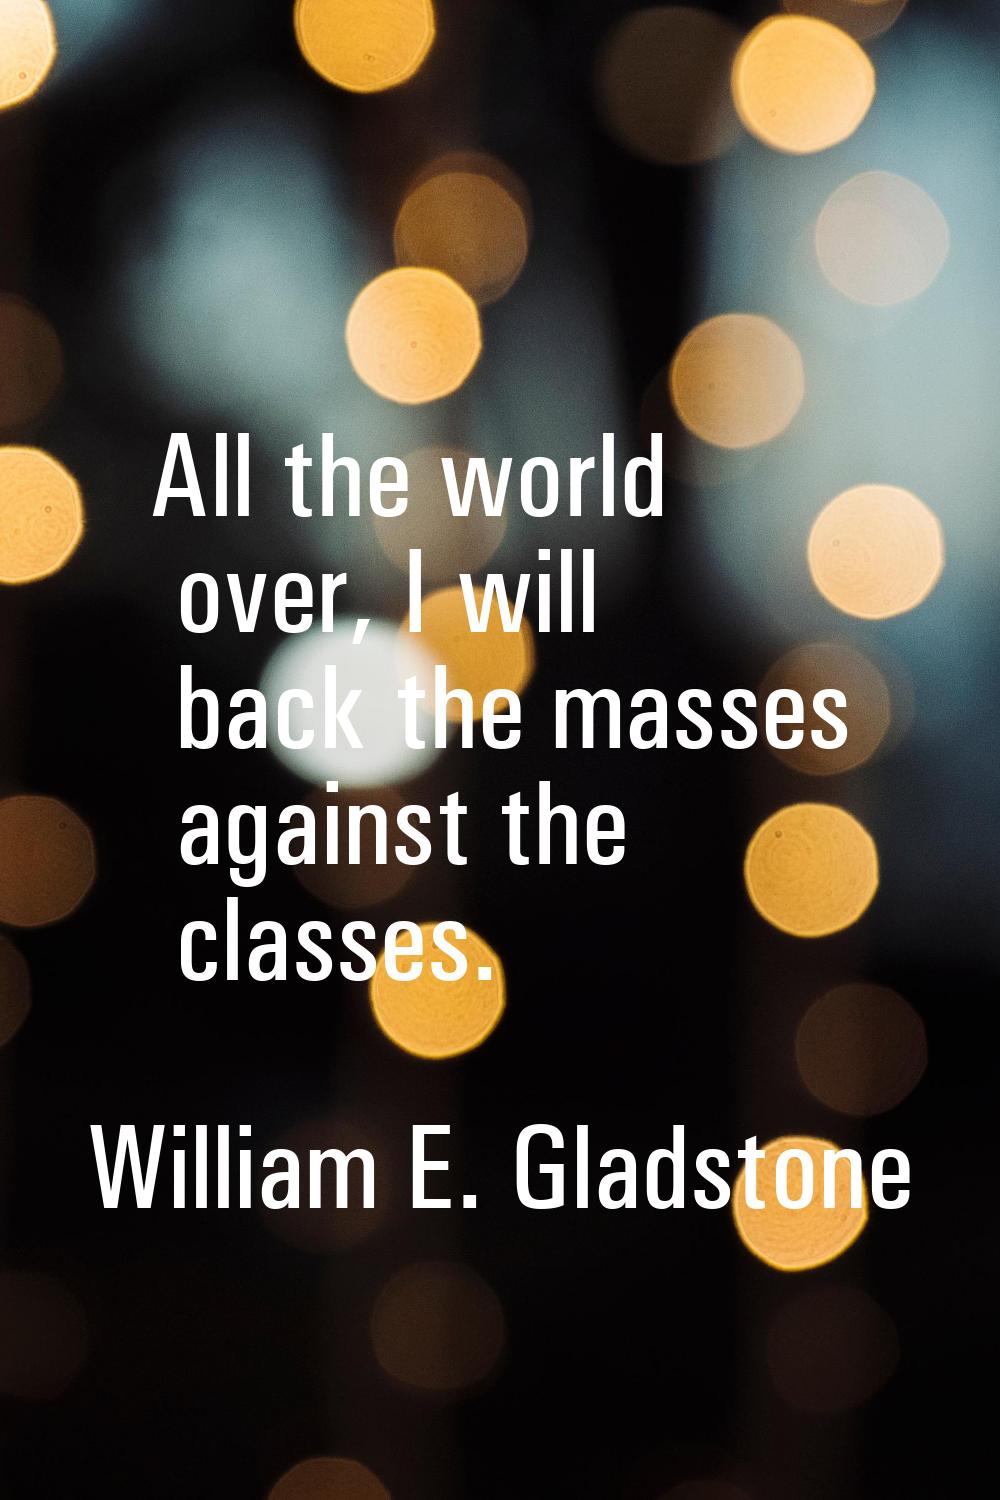 All the world over, I will back the masses against the classes.